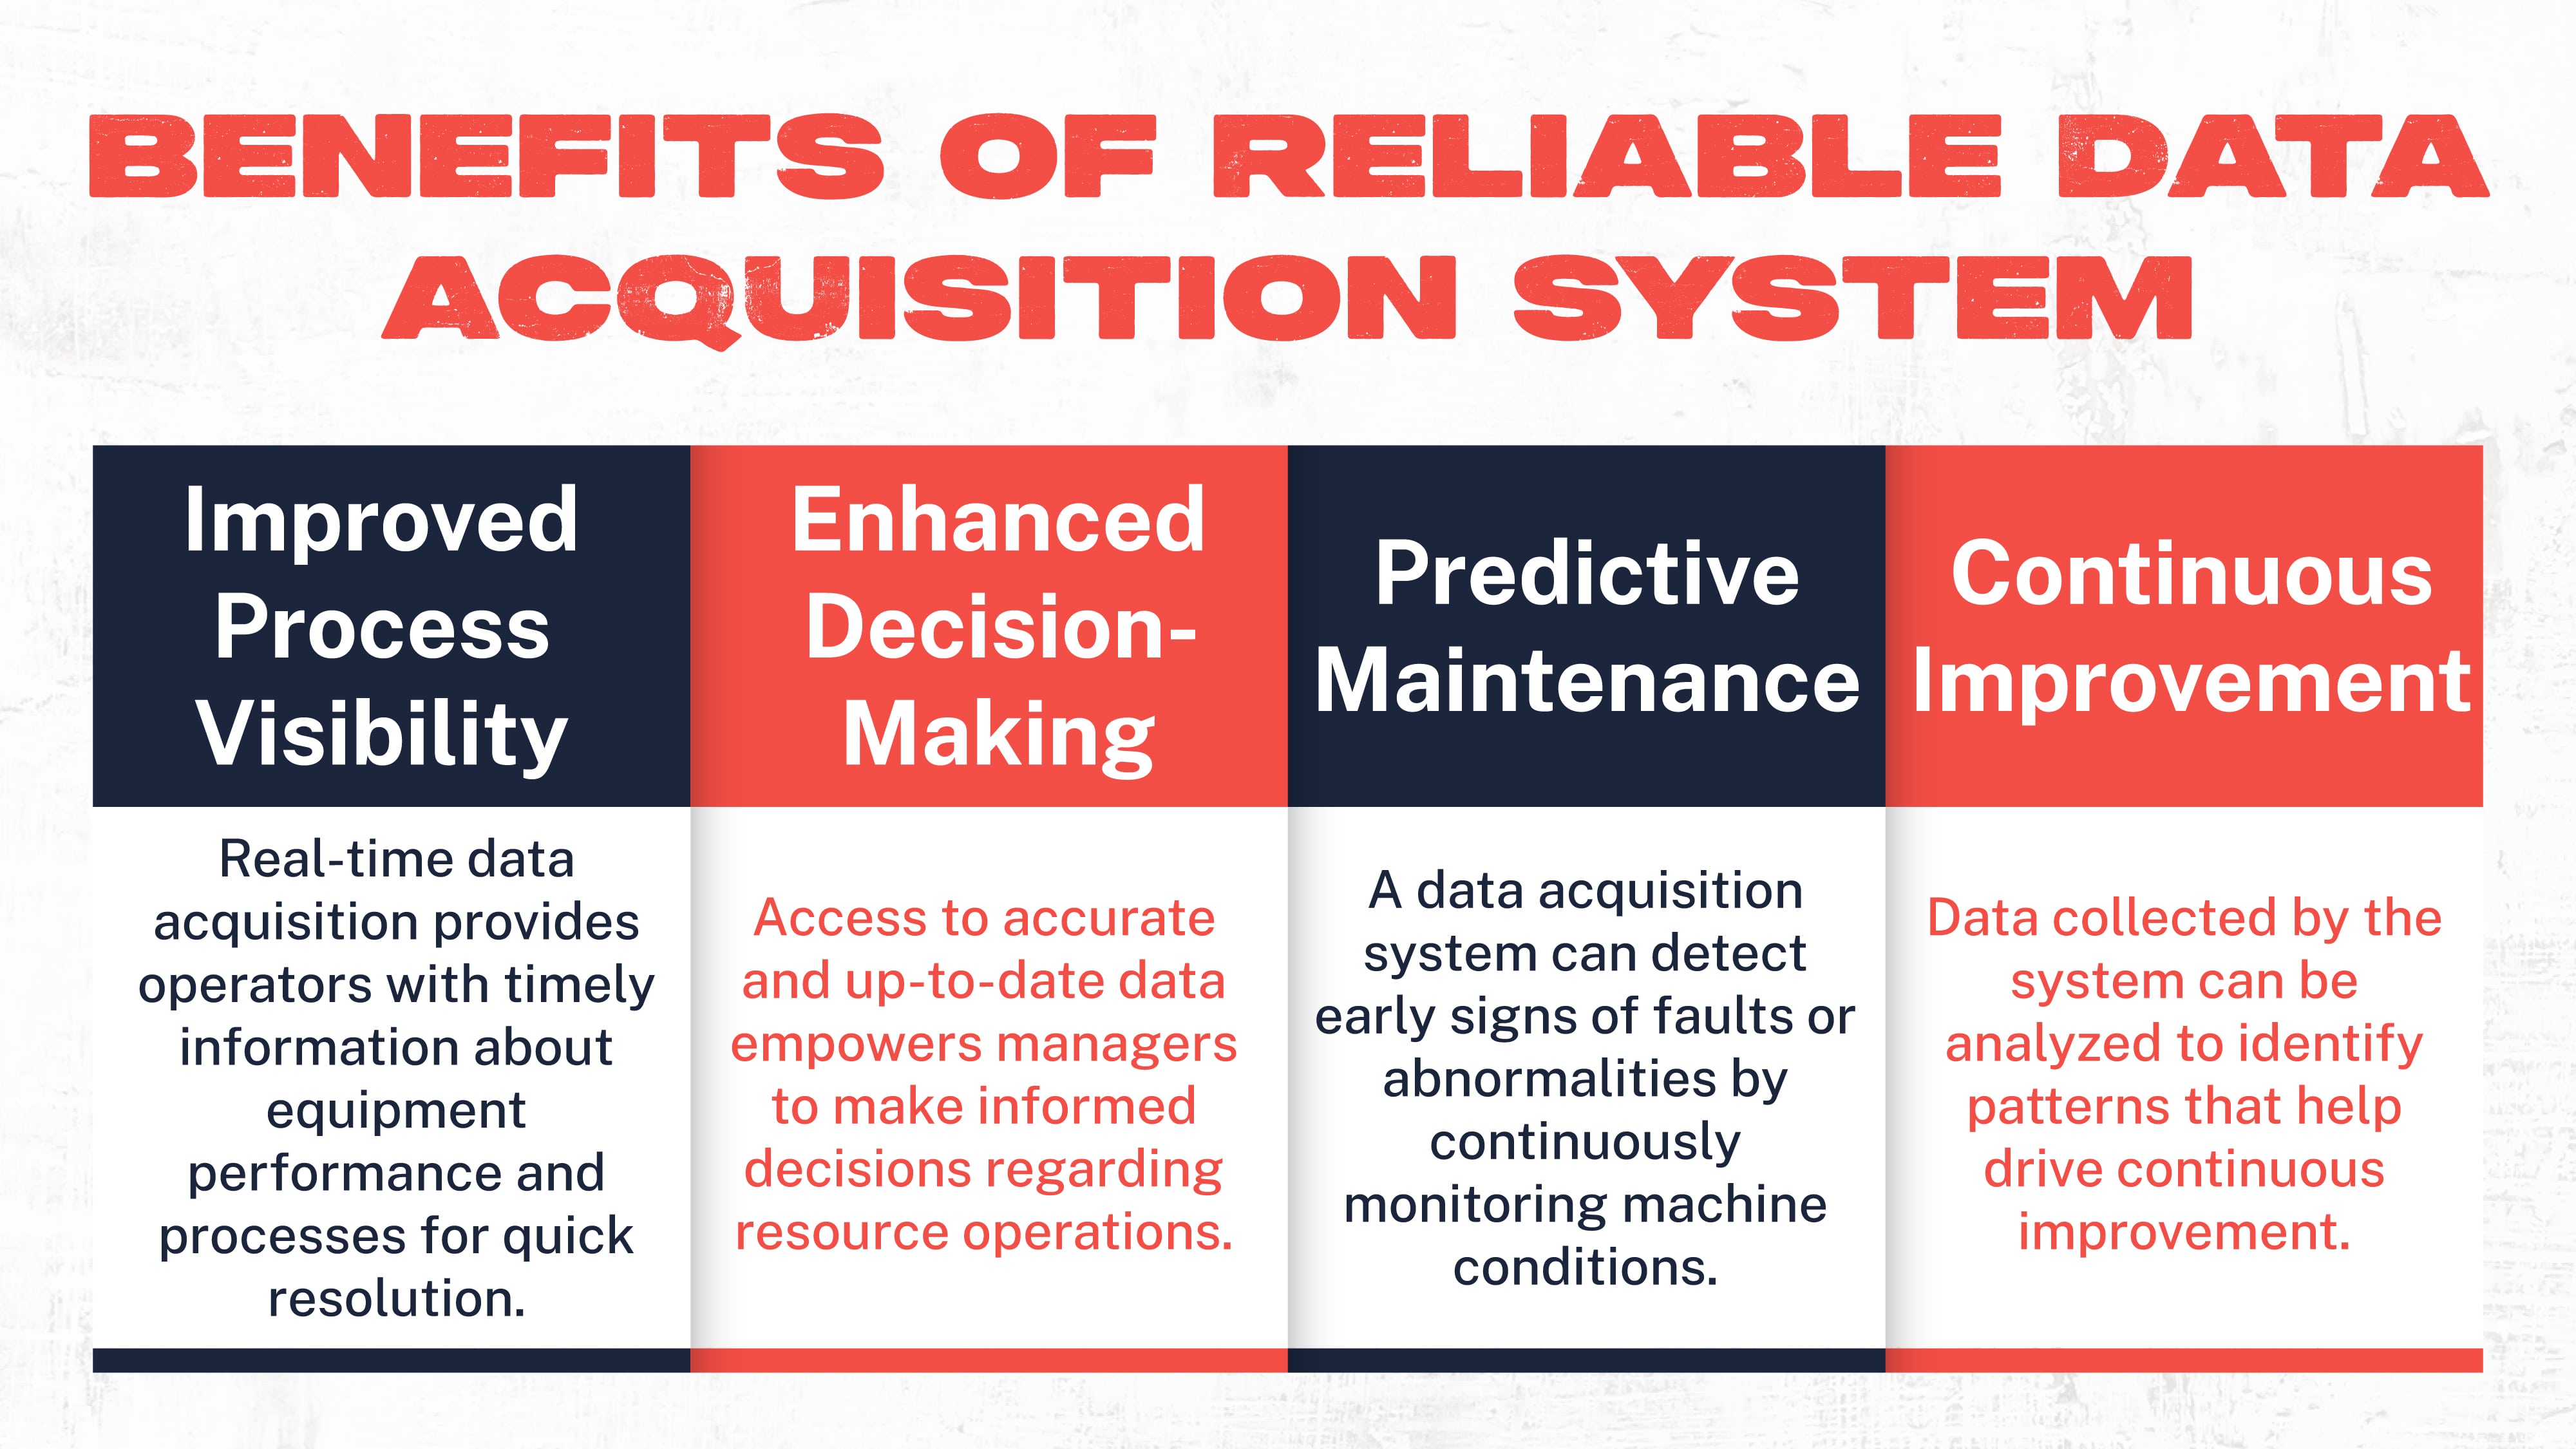 Benefits of Reliable Data Acquisition System